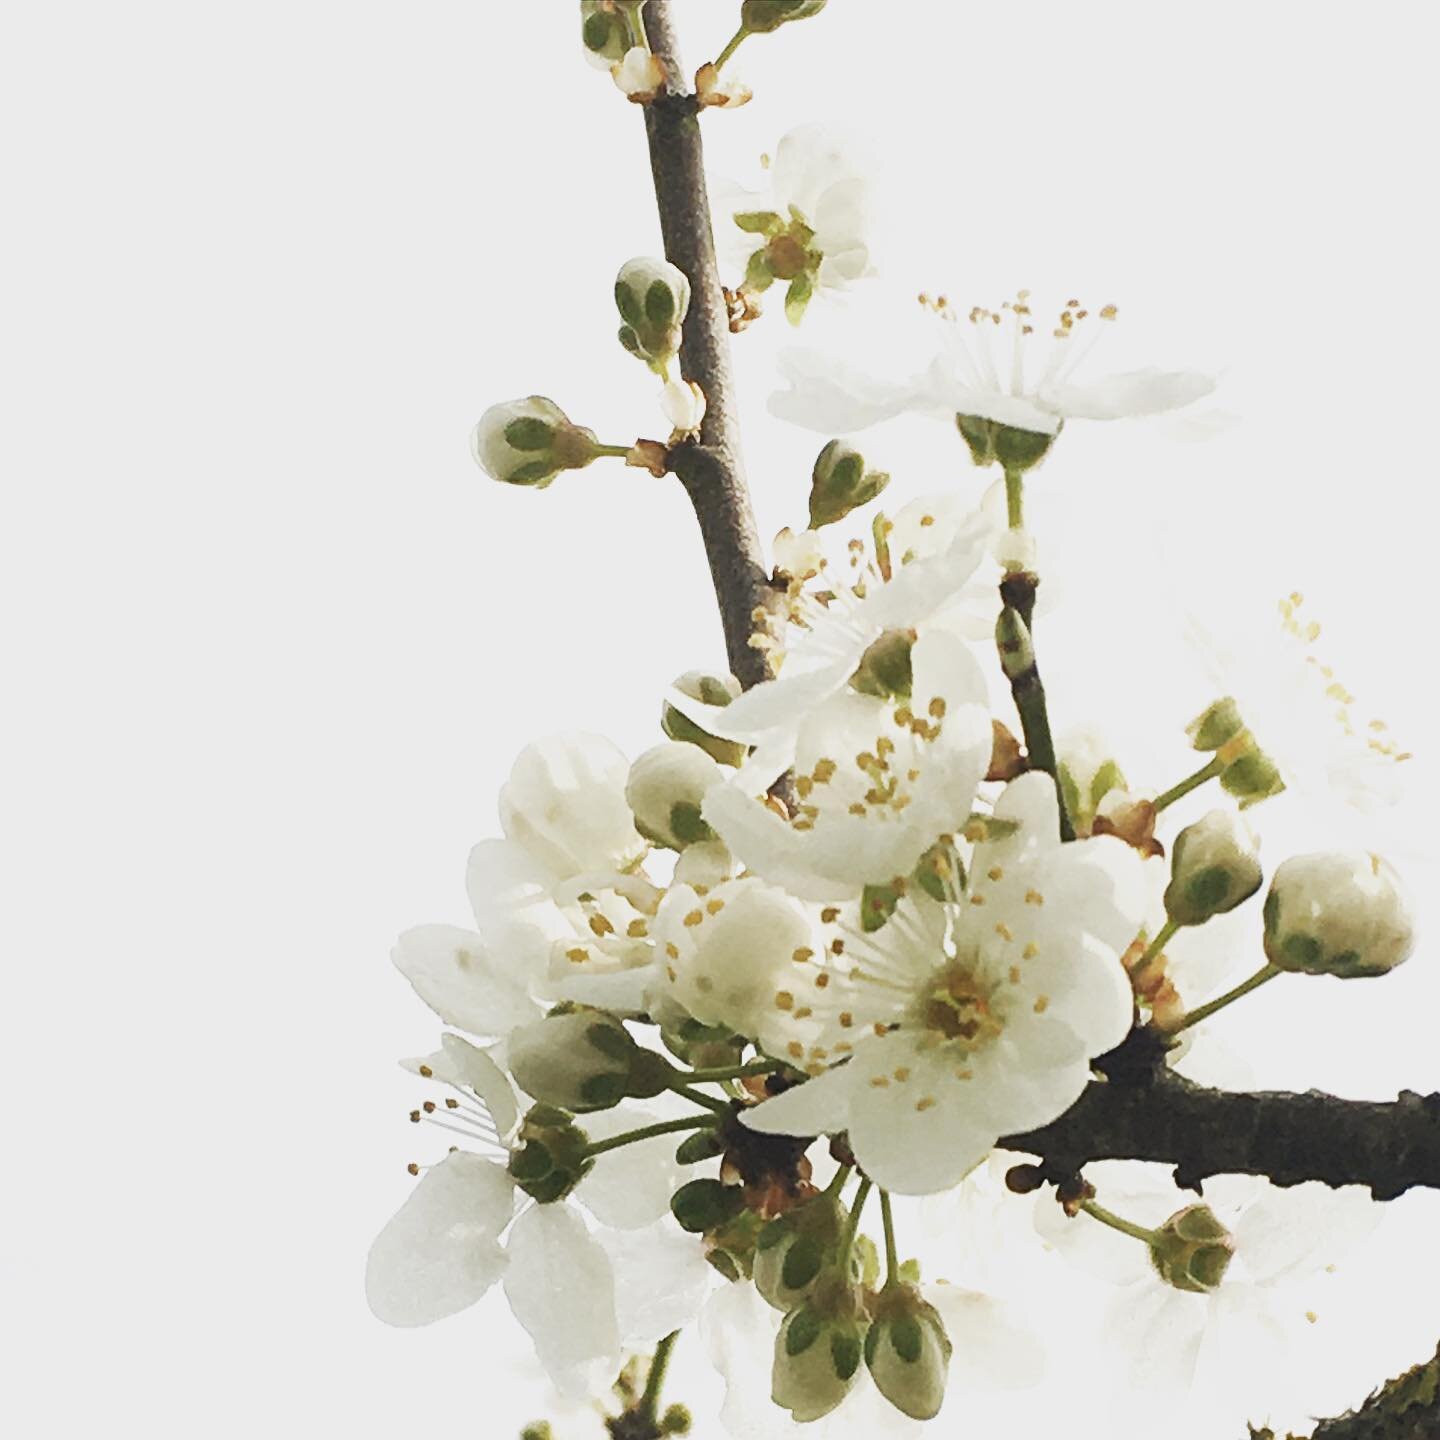 Hello spring! Beautiful blossom everywhere 🤍 💛 🤍

I hope everyone&rsquo;s week has got off to a good start x
.
.
.
.
.
.
#spring #springtime #hope #signsofspring #thebeautyinspring #seasonspoetry #intentionalliving #myslowandsimple #noticepausetre